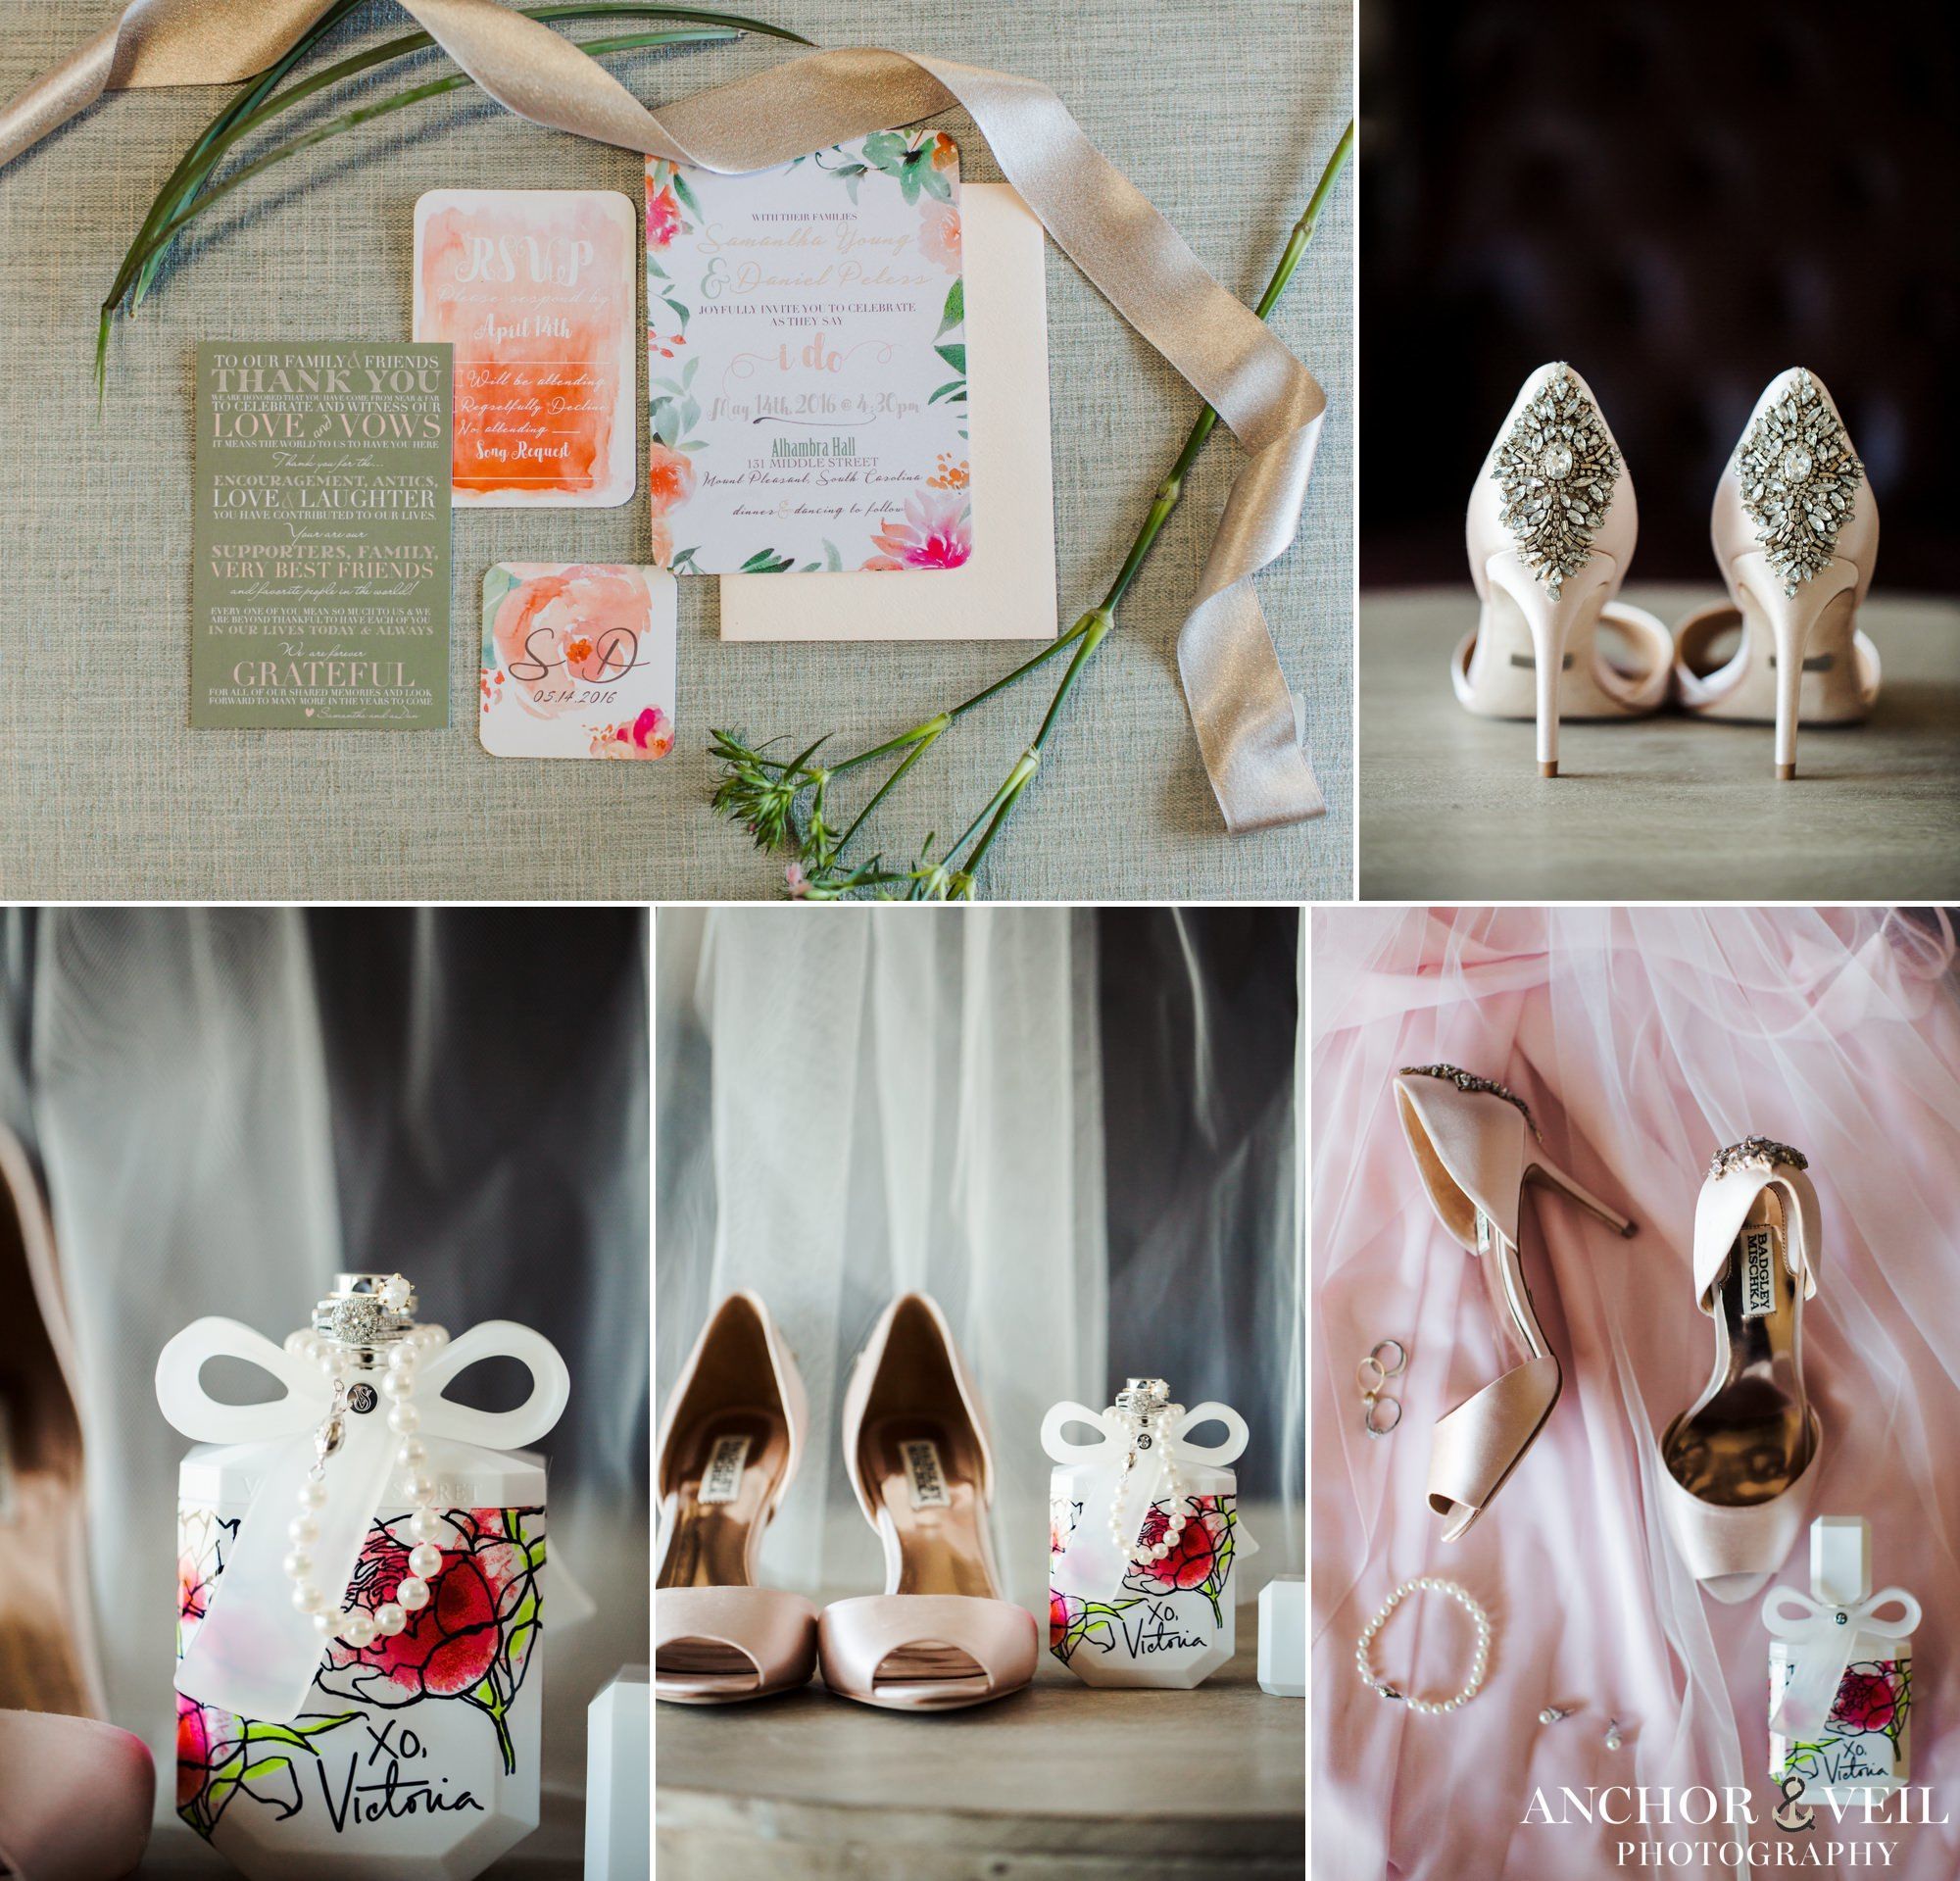 Brides shoes, stationary and perfume